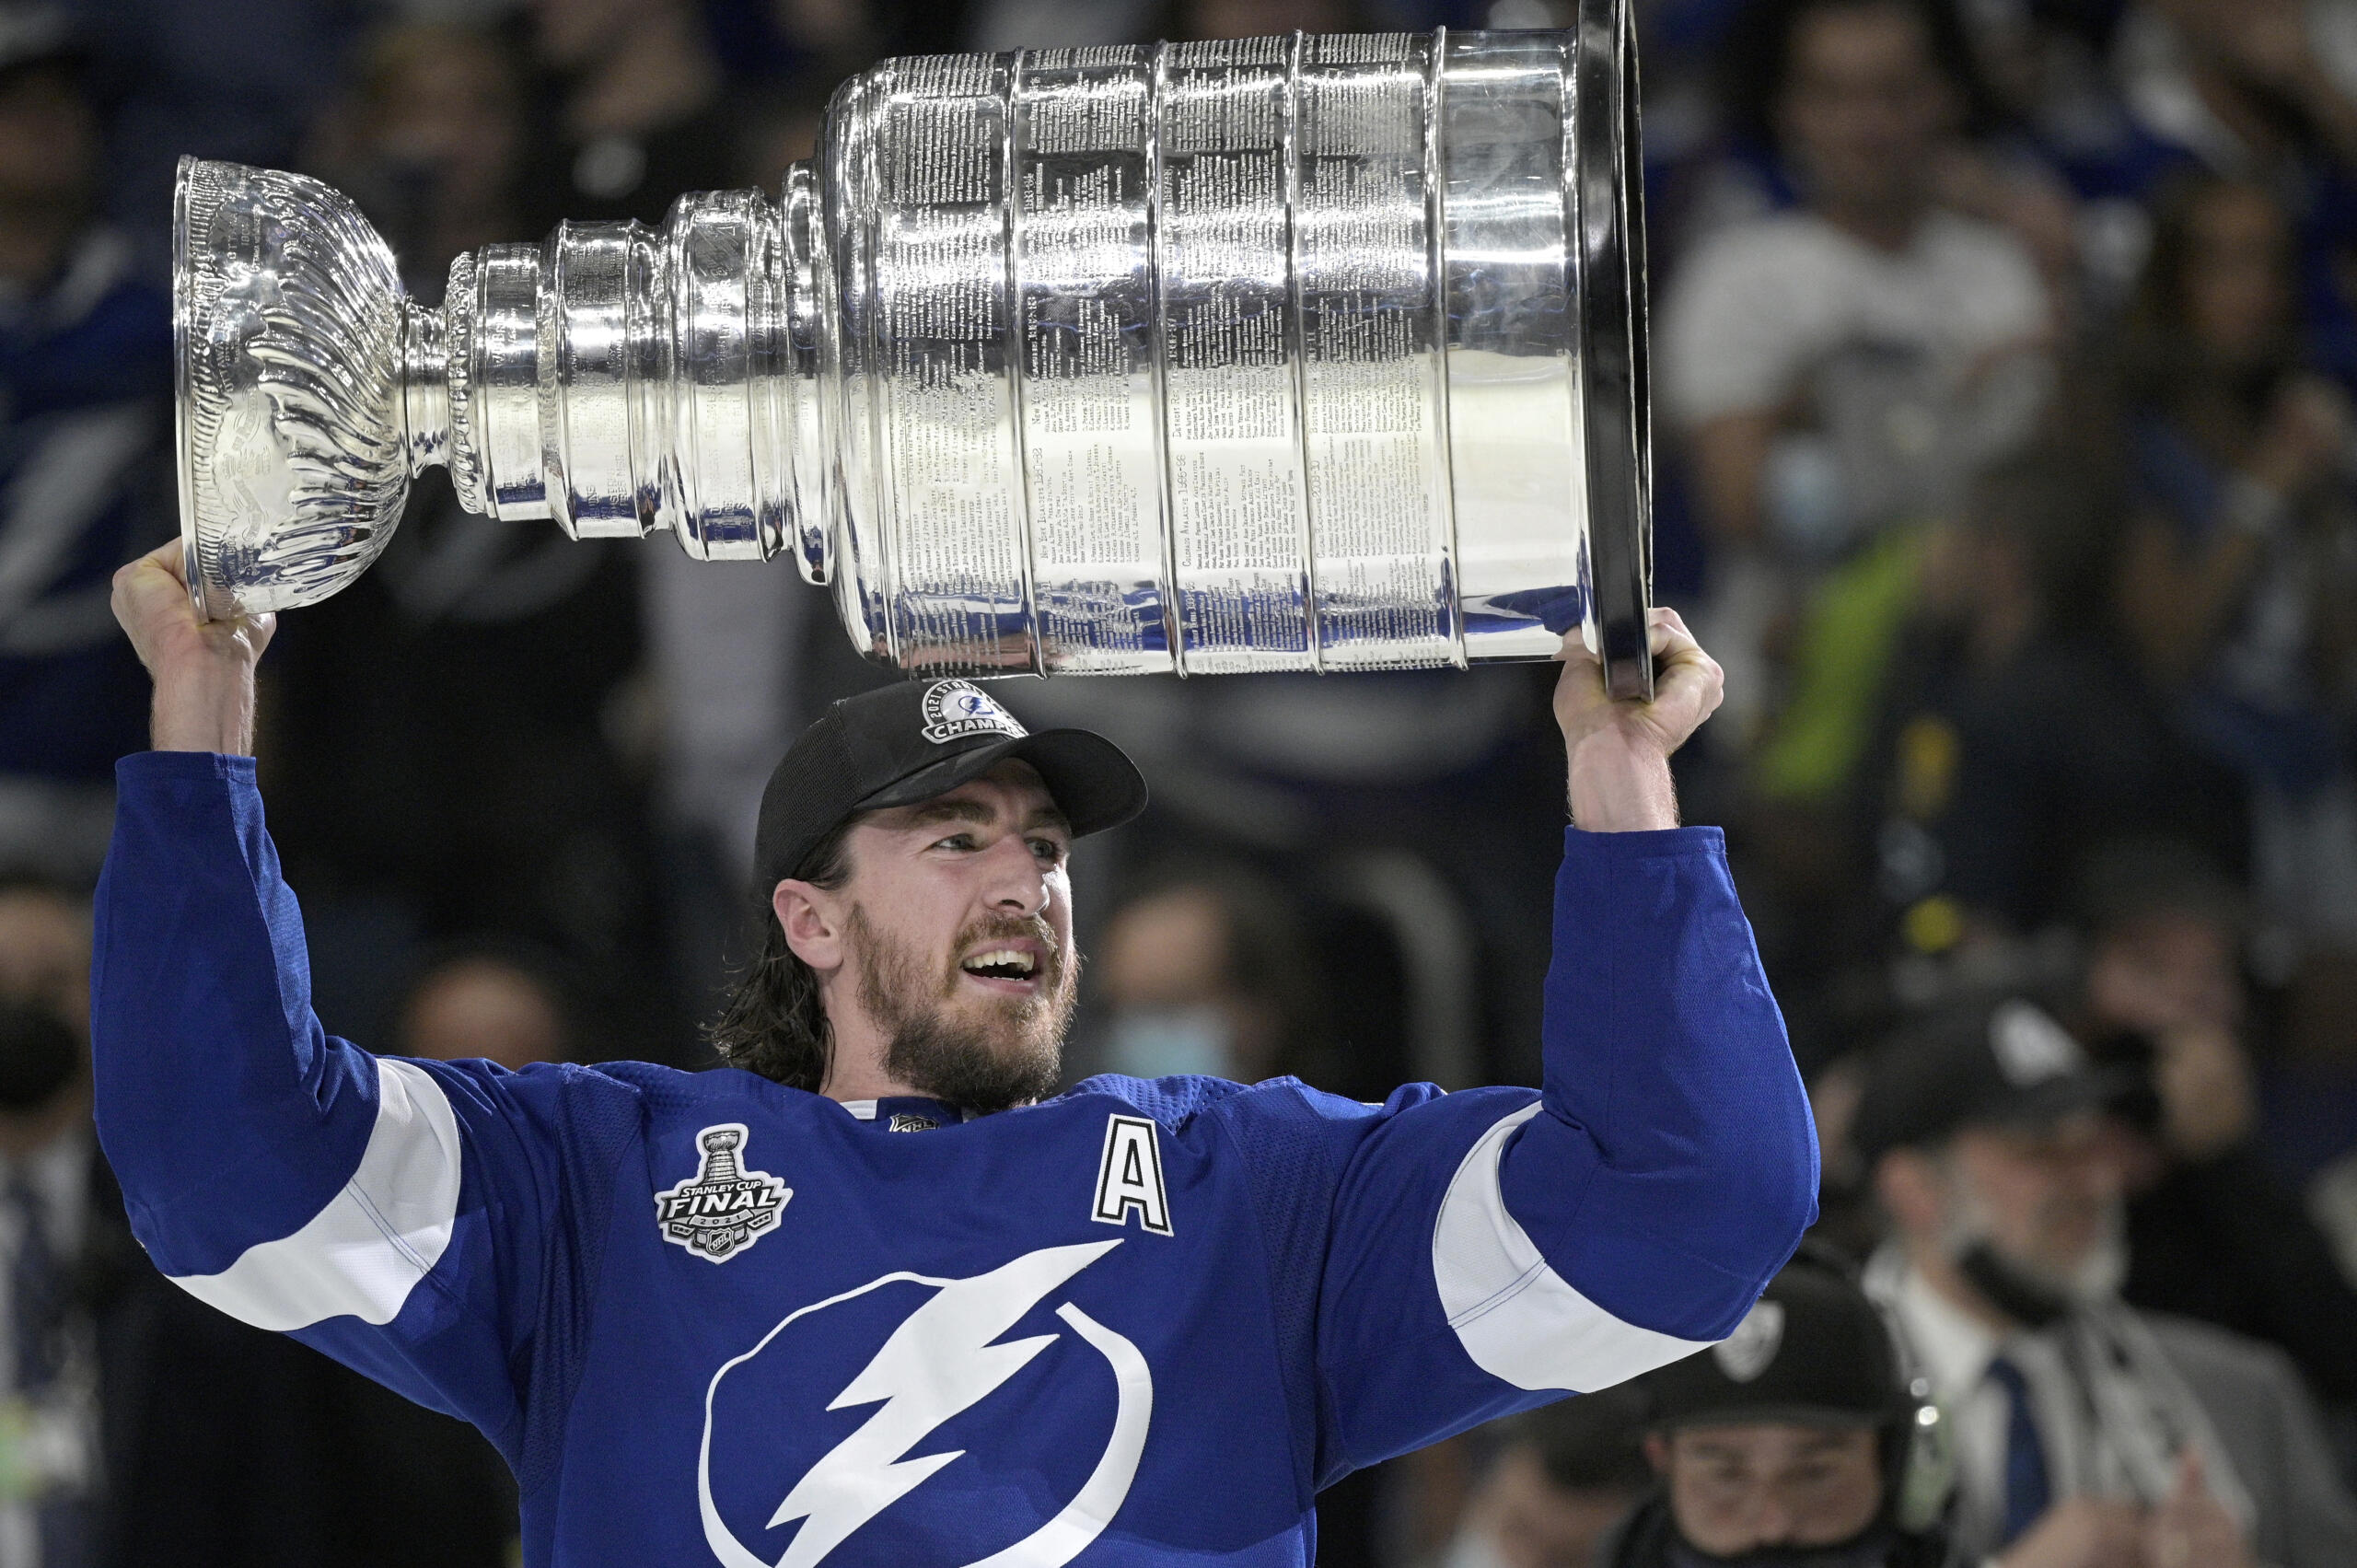 Tampa Bay Lightning defenseman Ryan McDonagh hoists the Stanley Cup after getting the win over the Montreal Canadiens in Game 5 of the NHL hockey Stanley Cup finals series, Wednesday, July 7, 2021, in Tampa, Fla. (AP Photo/Phelan M.